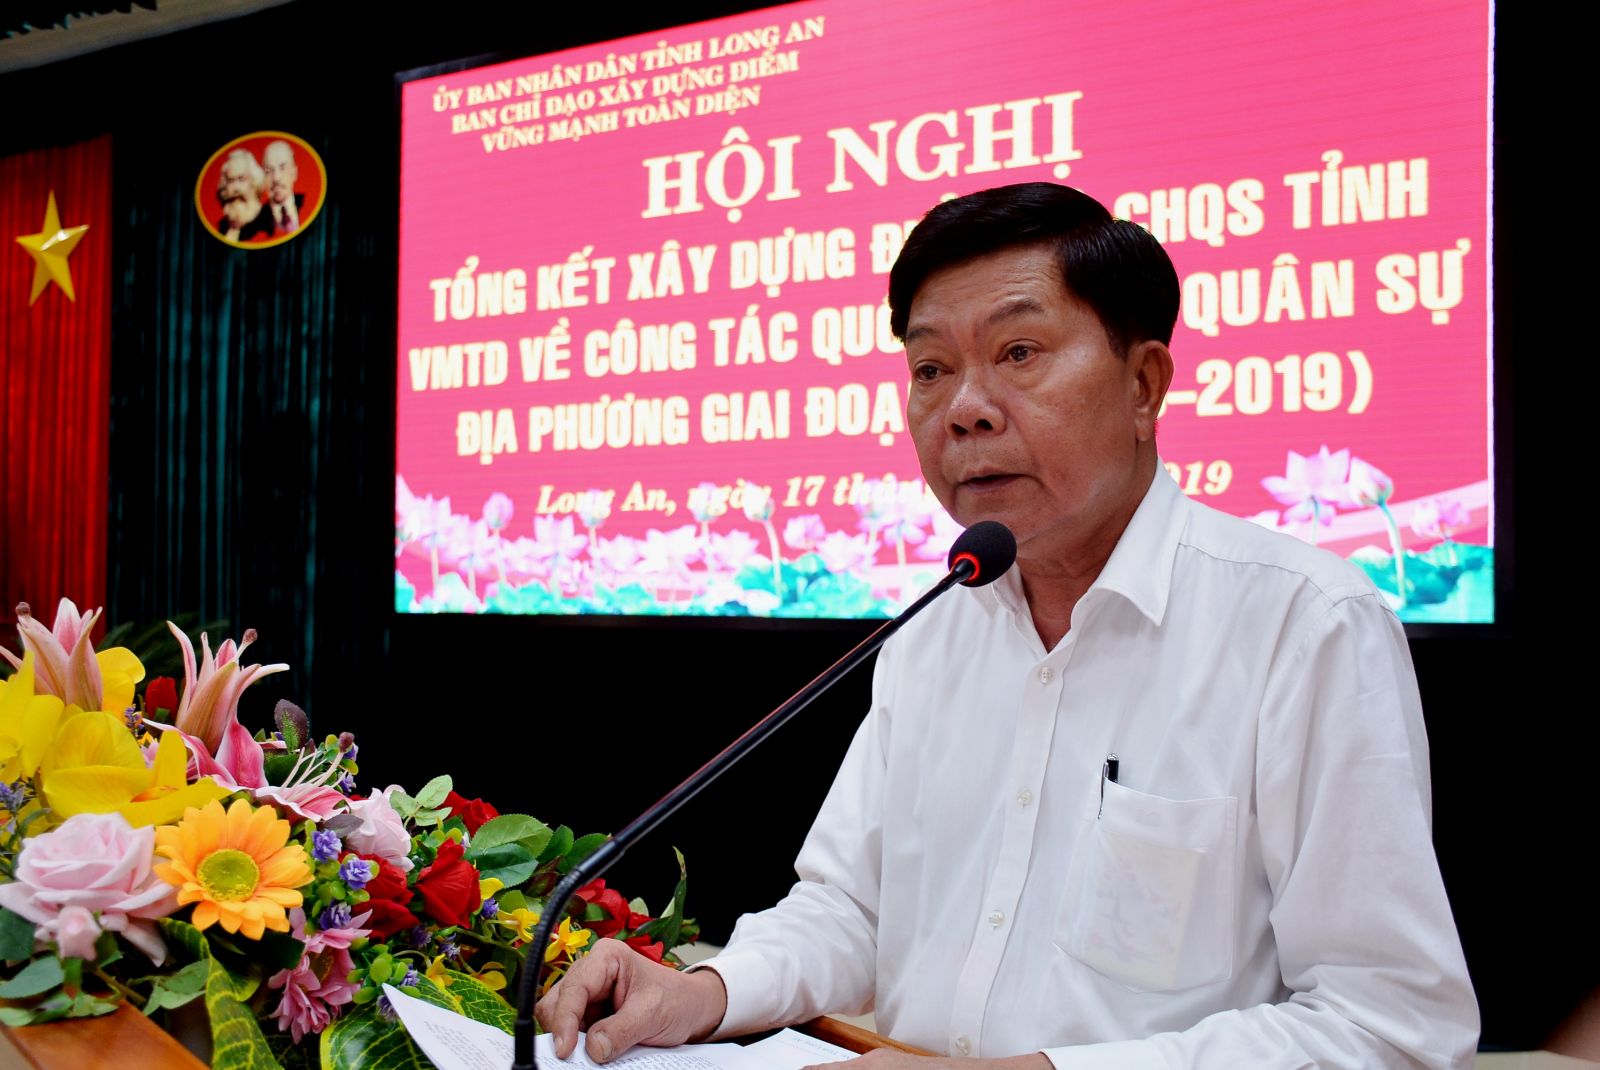 Chairman of the Provincial People's Committee - Tran Van Can speaks at the conference